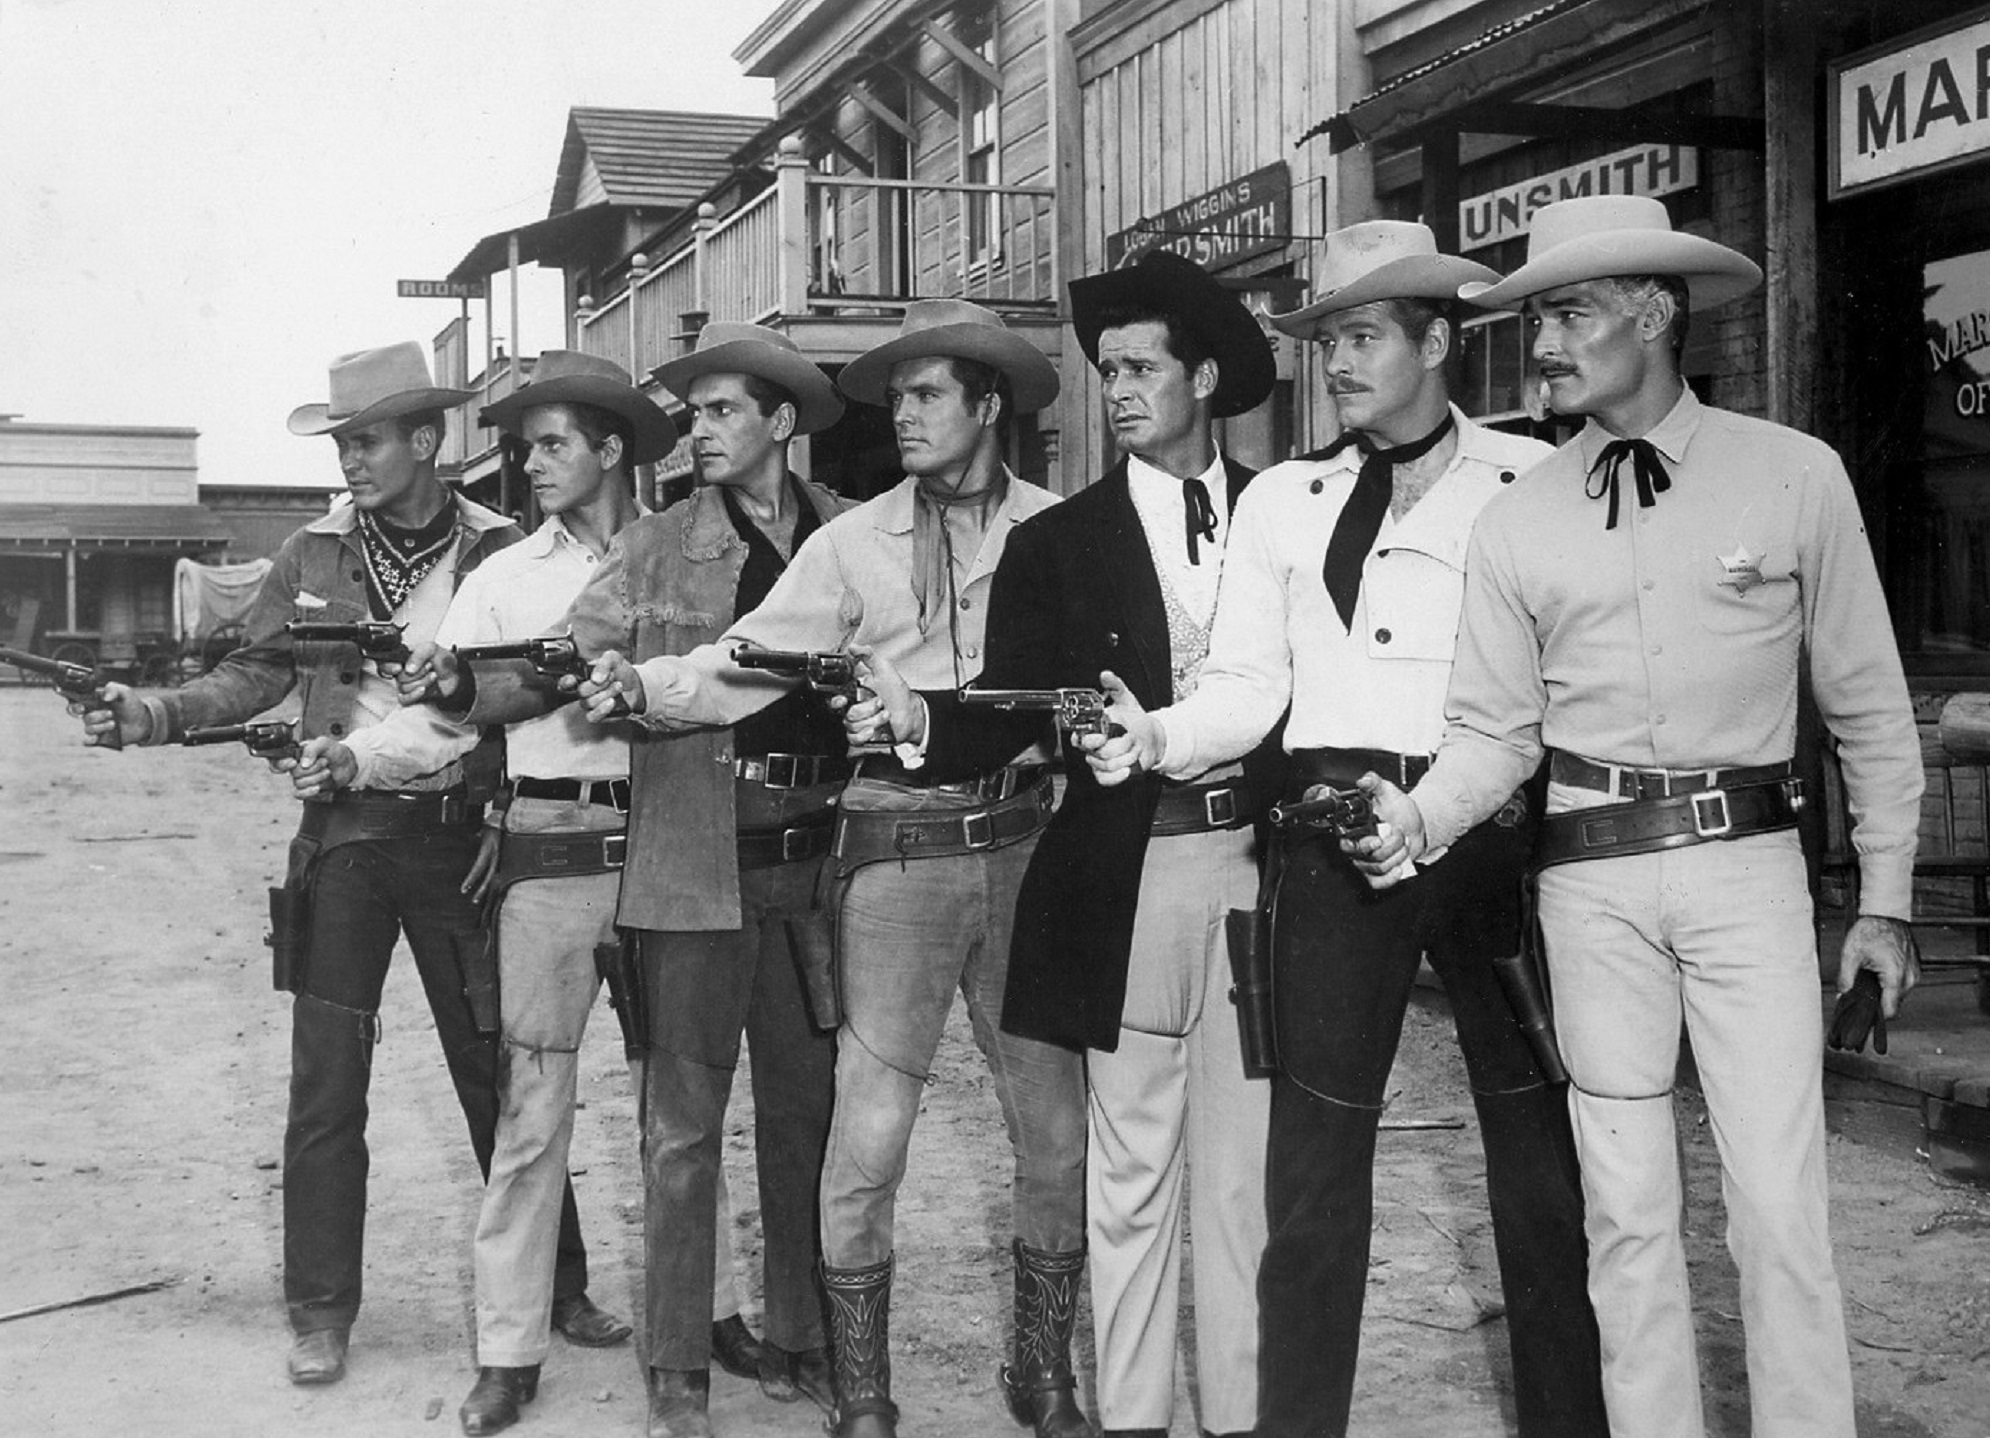 Old photo of Warner Brothers stars from the old TV show westerns